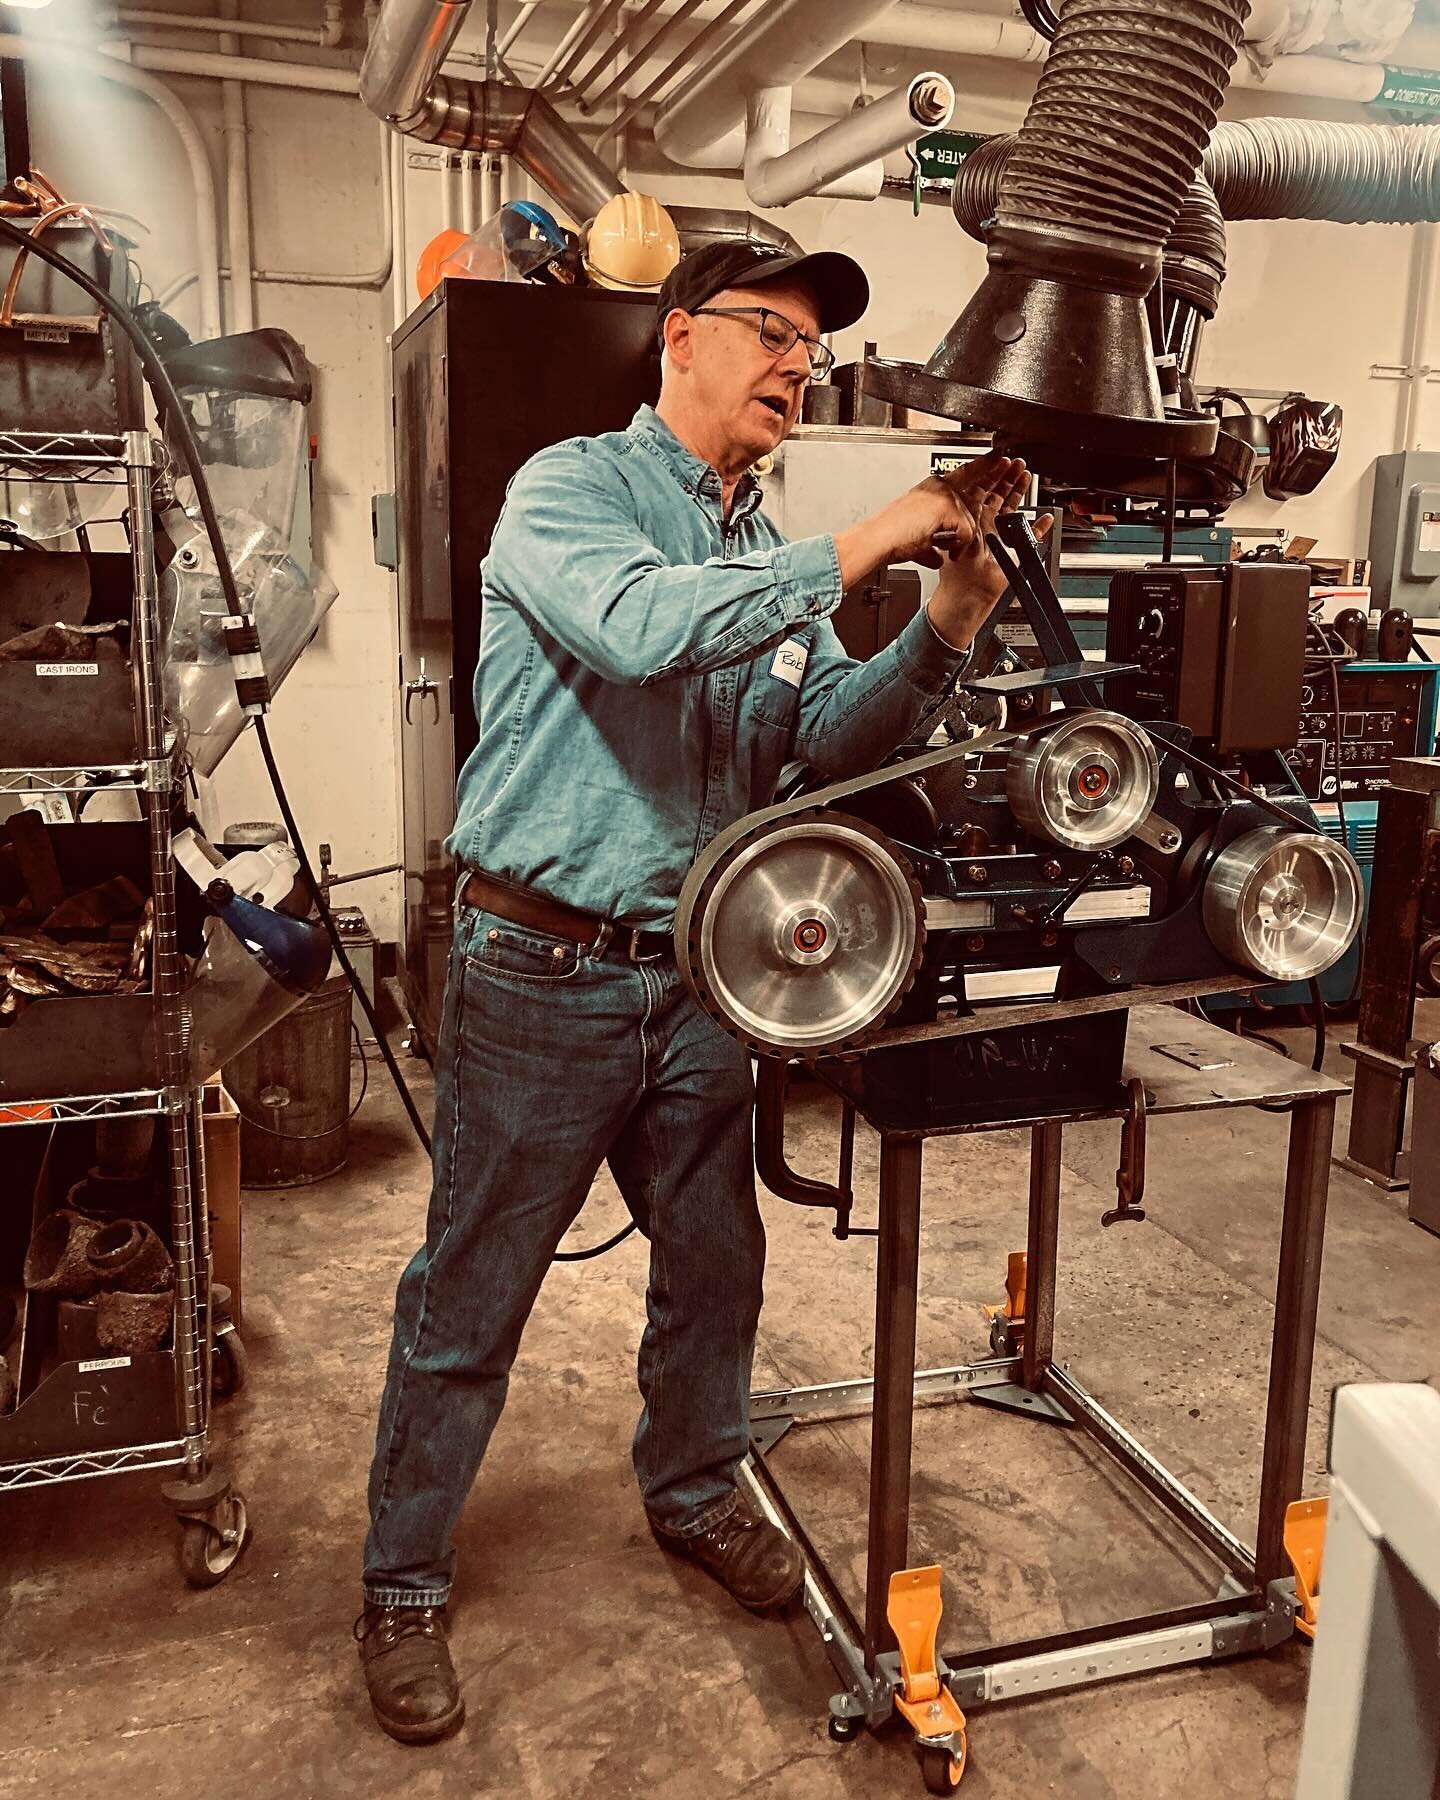 Master Bladesmith @bobkramerknives is teaching workshops in the MIT forge/foundry this whole month!!! Day 1

Amazing

@mtarkanian mastermind of this visit